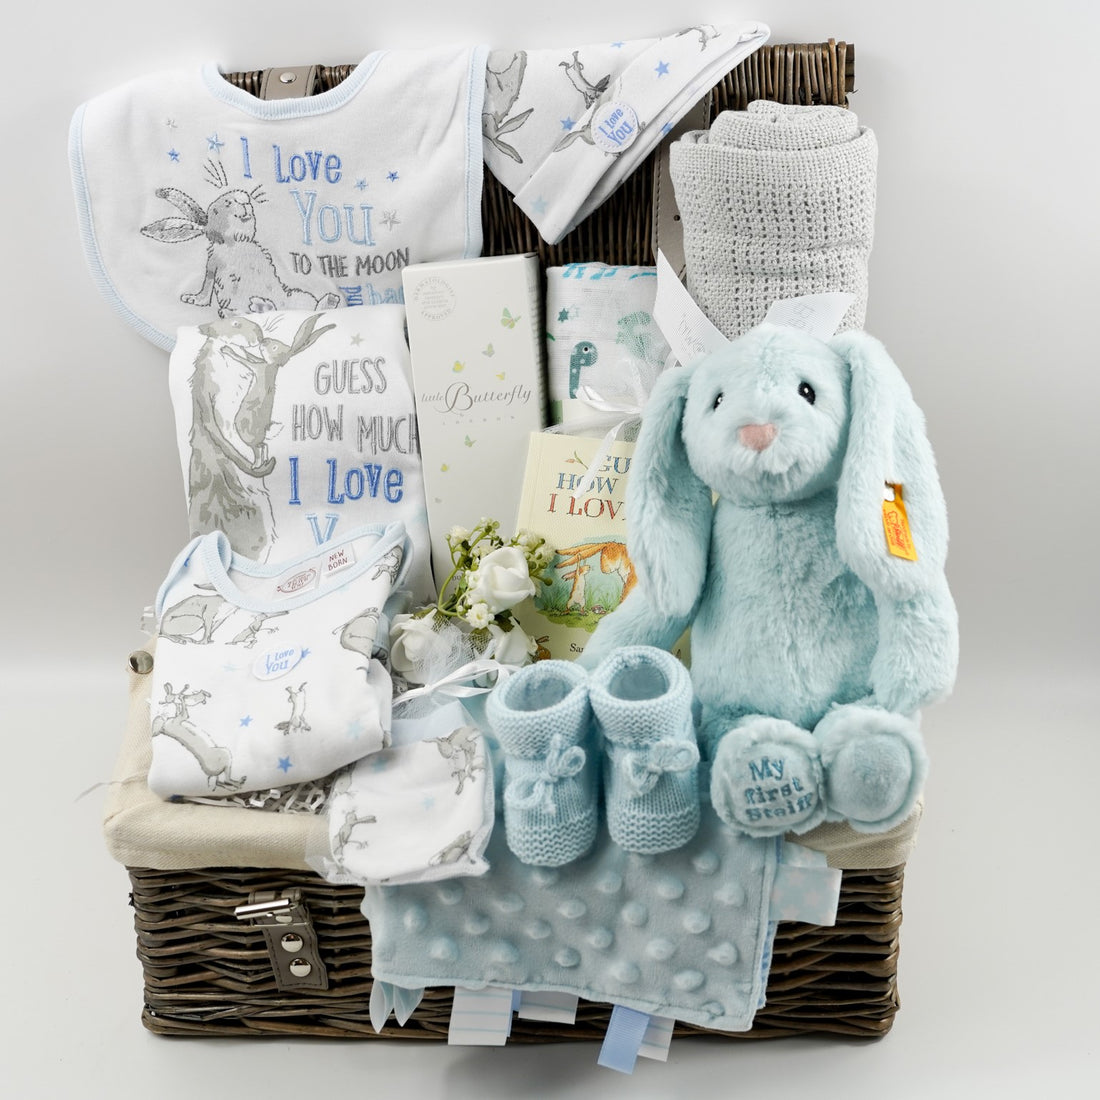 Choosing A Corporate Maternity Gift